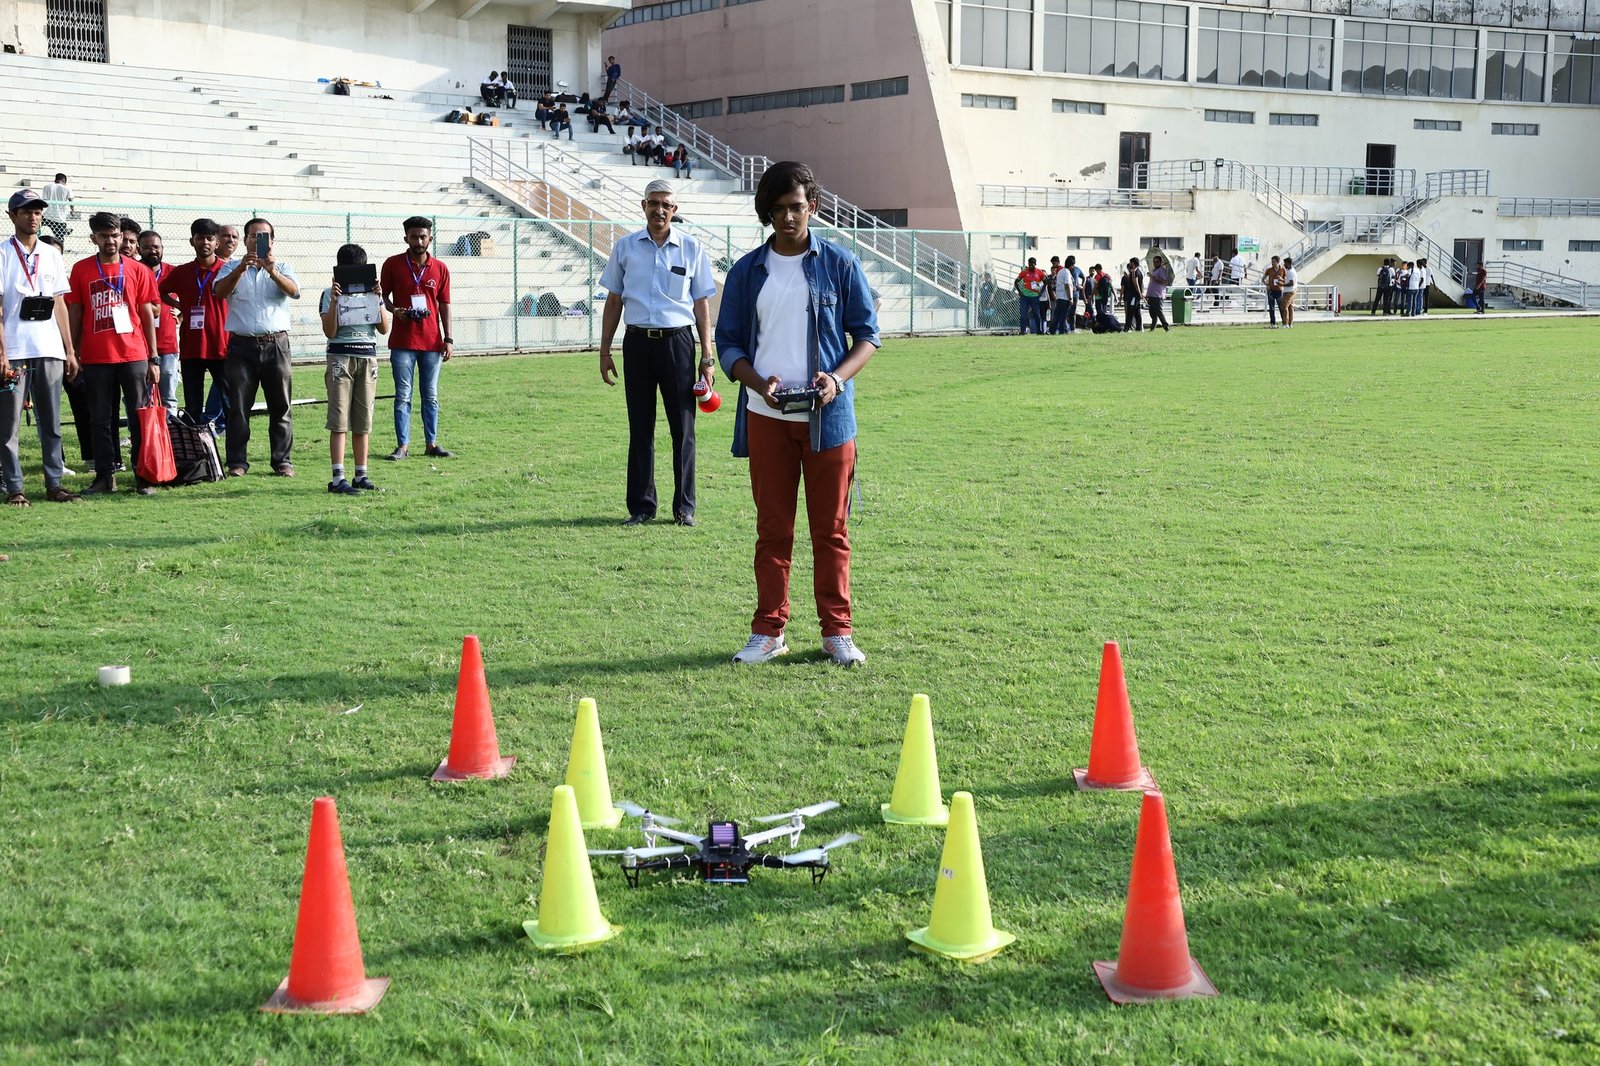 TechnoXian WRC 7.0 Drone Competition Soars with Skillful Flyers